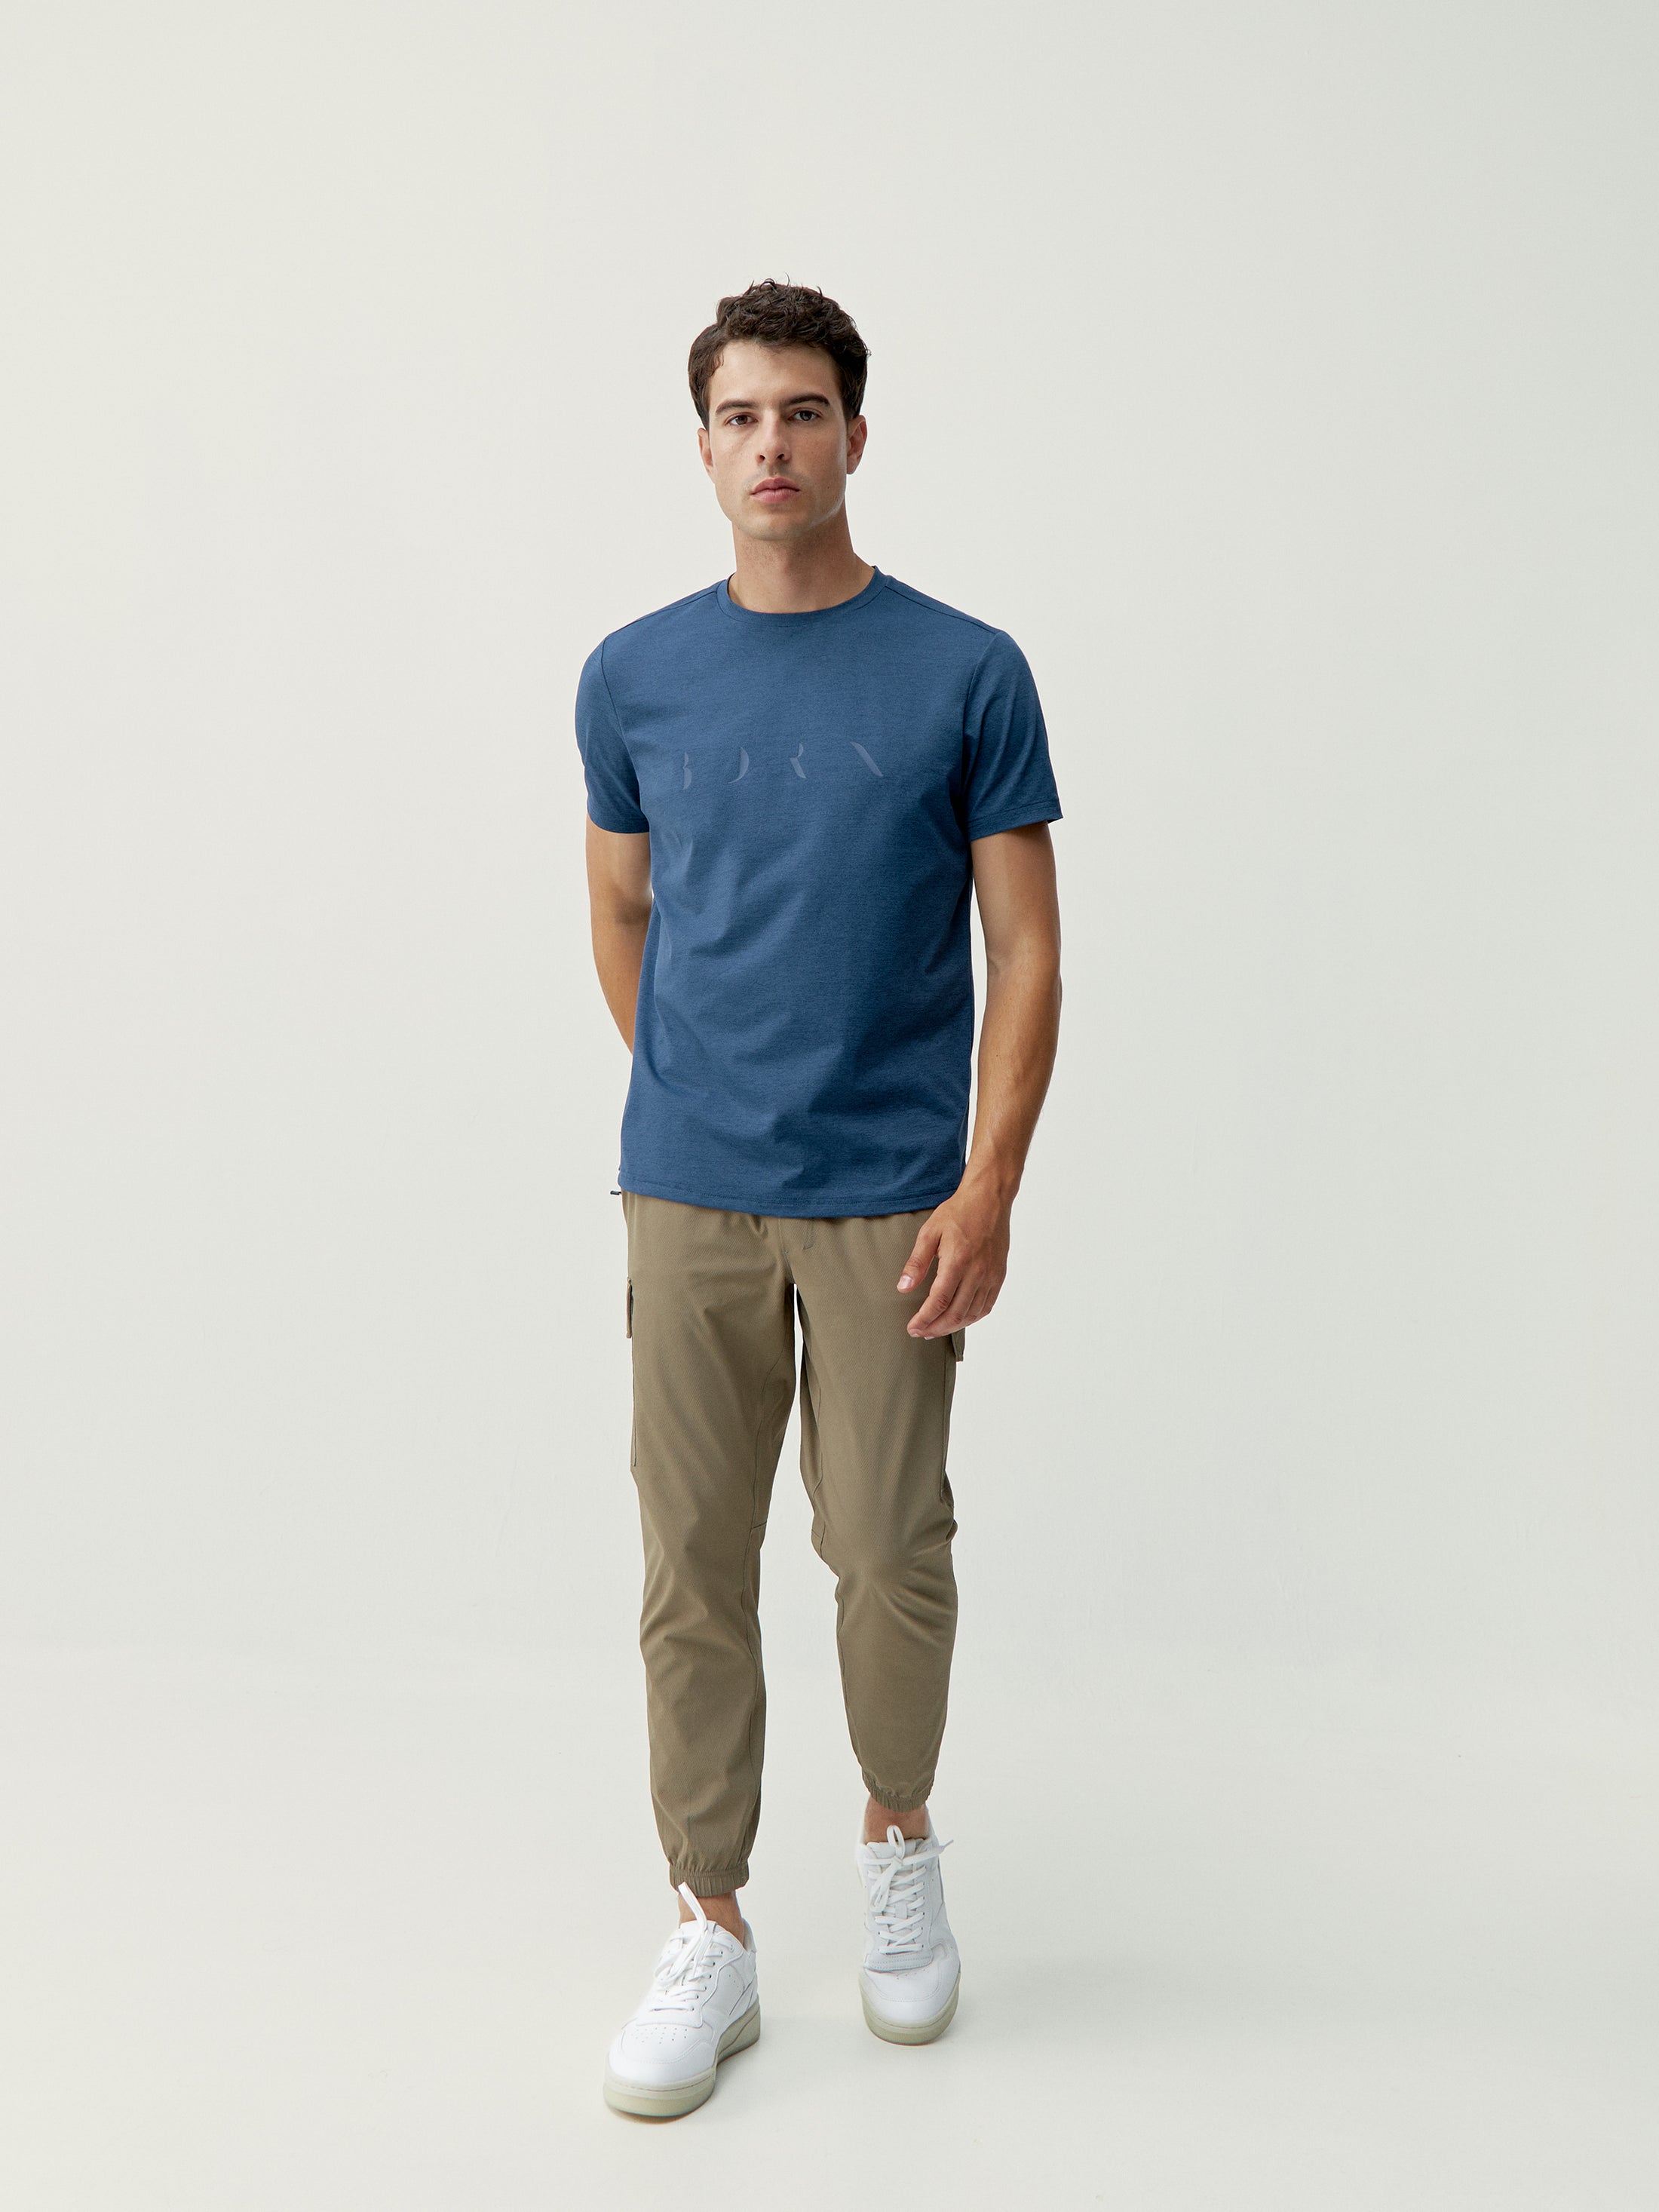 Melville T-Shirt in Sea Blue